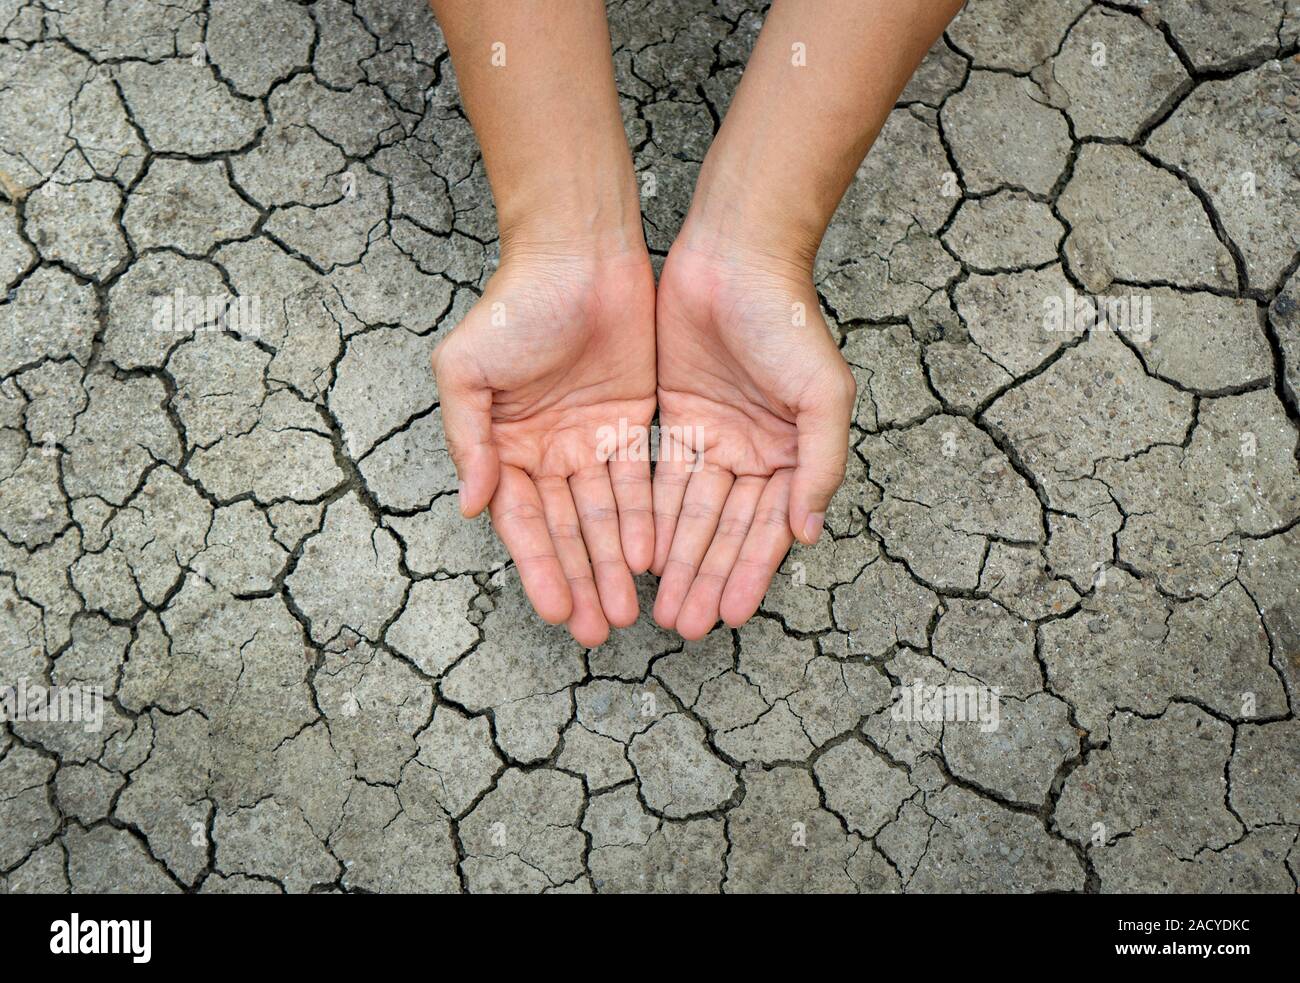 Asian woman's hand On dry, cracked soil or soil during the dry season Stock Photo